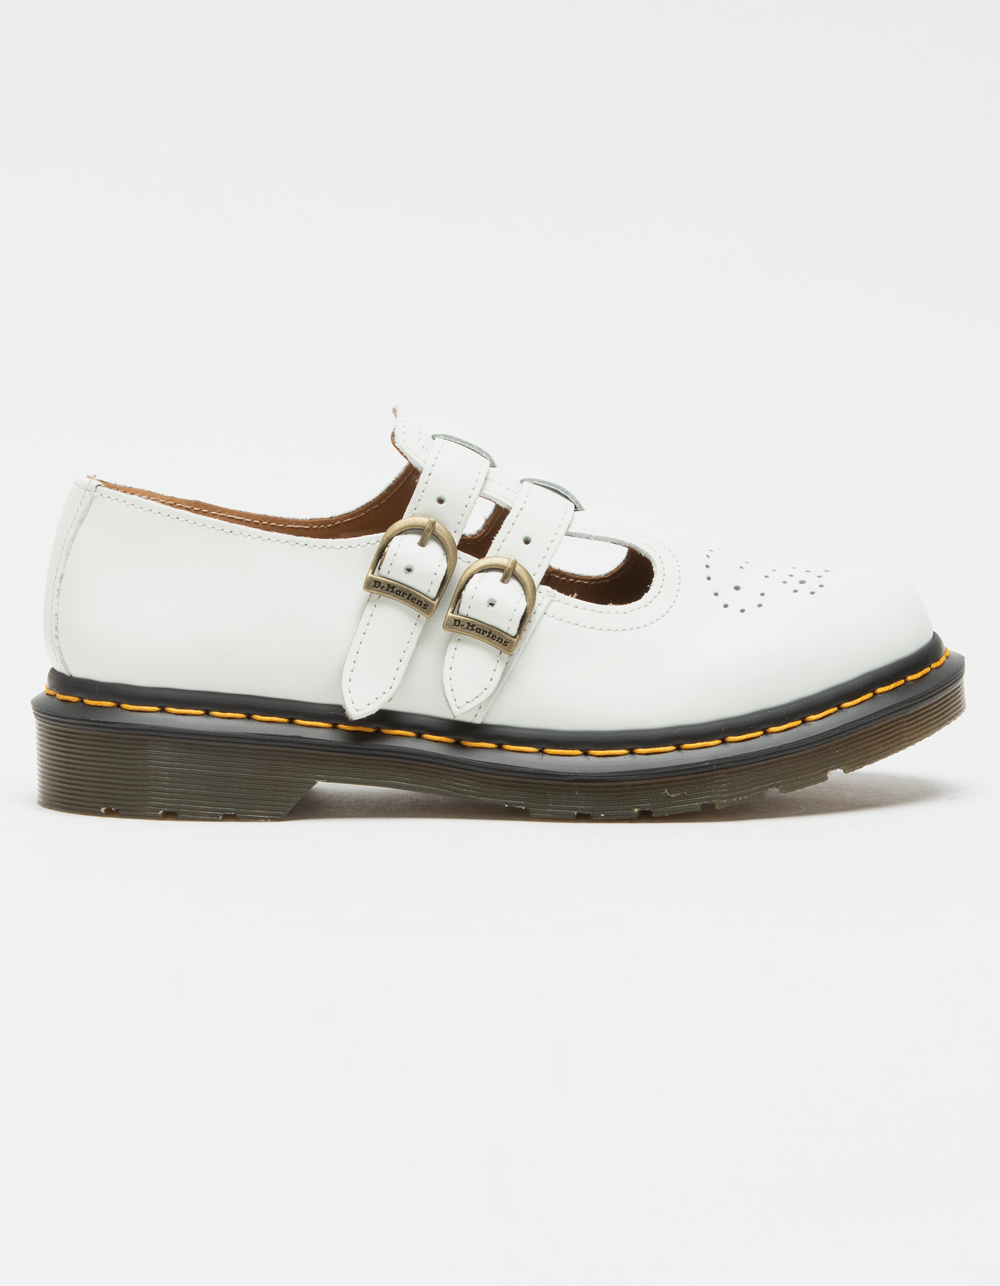 Dr. Martens 8065 Mary Jane Shoes